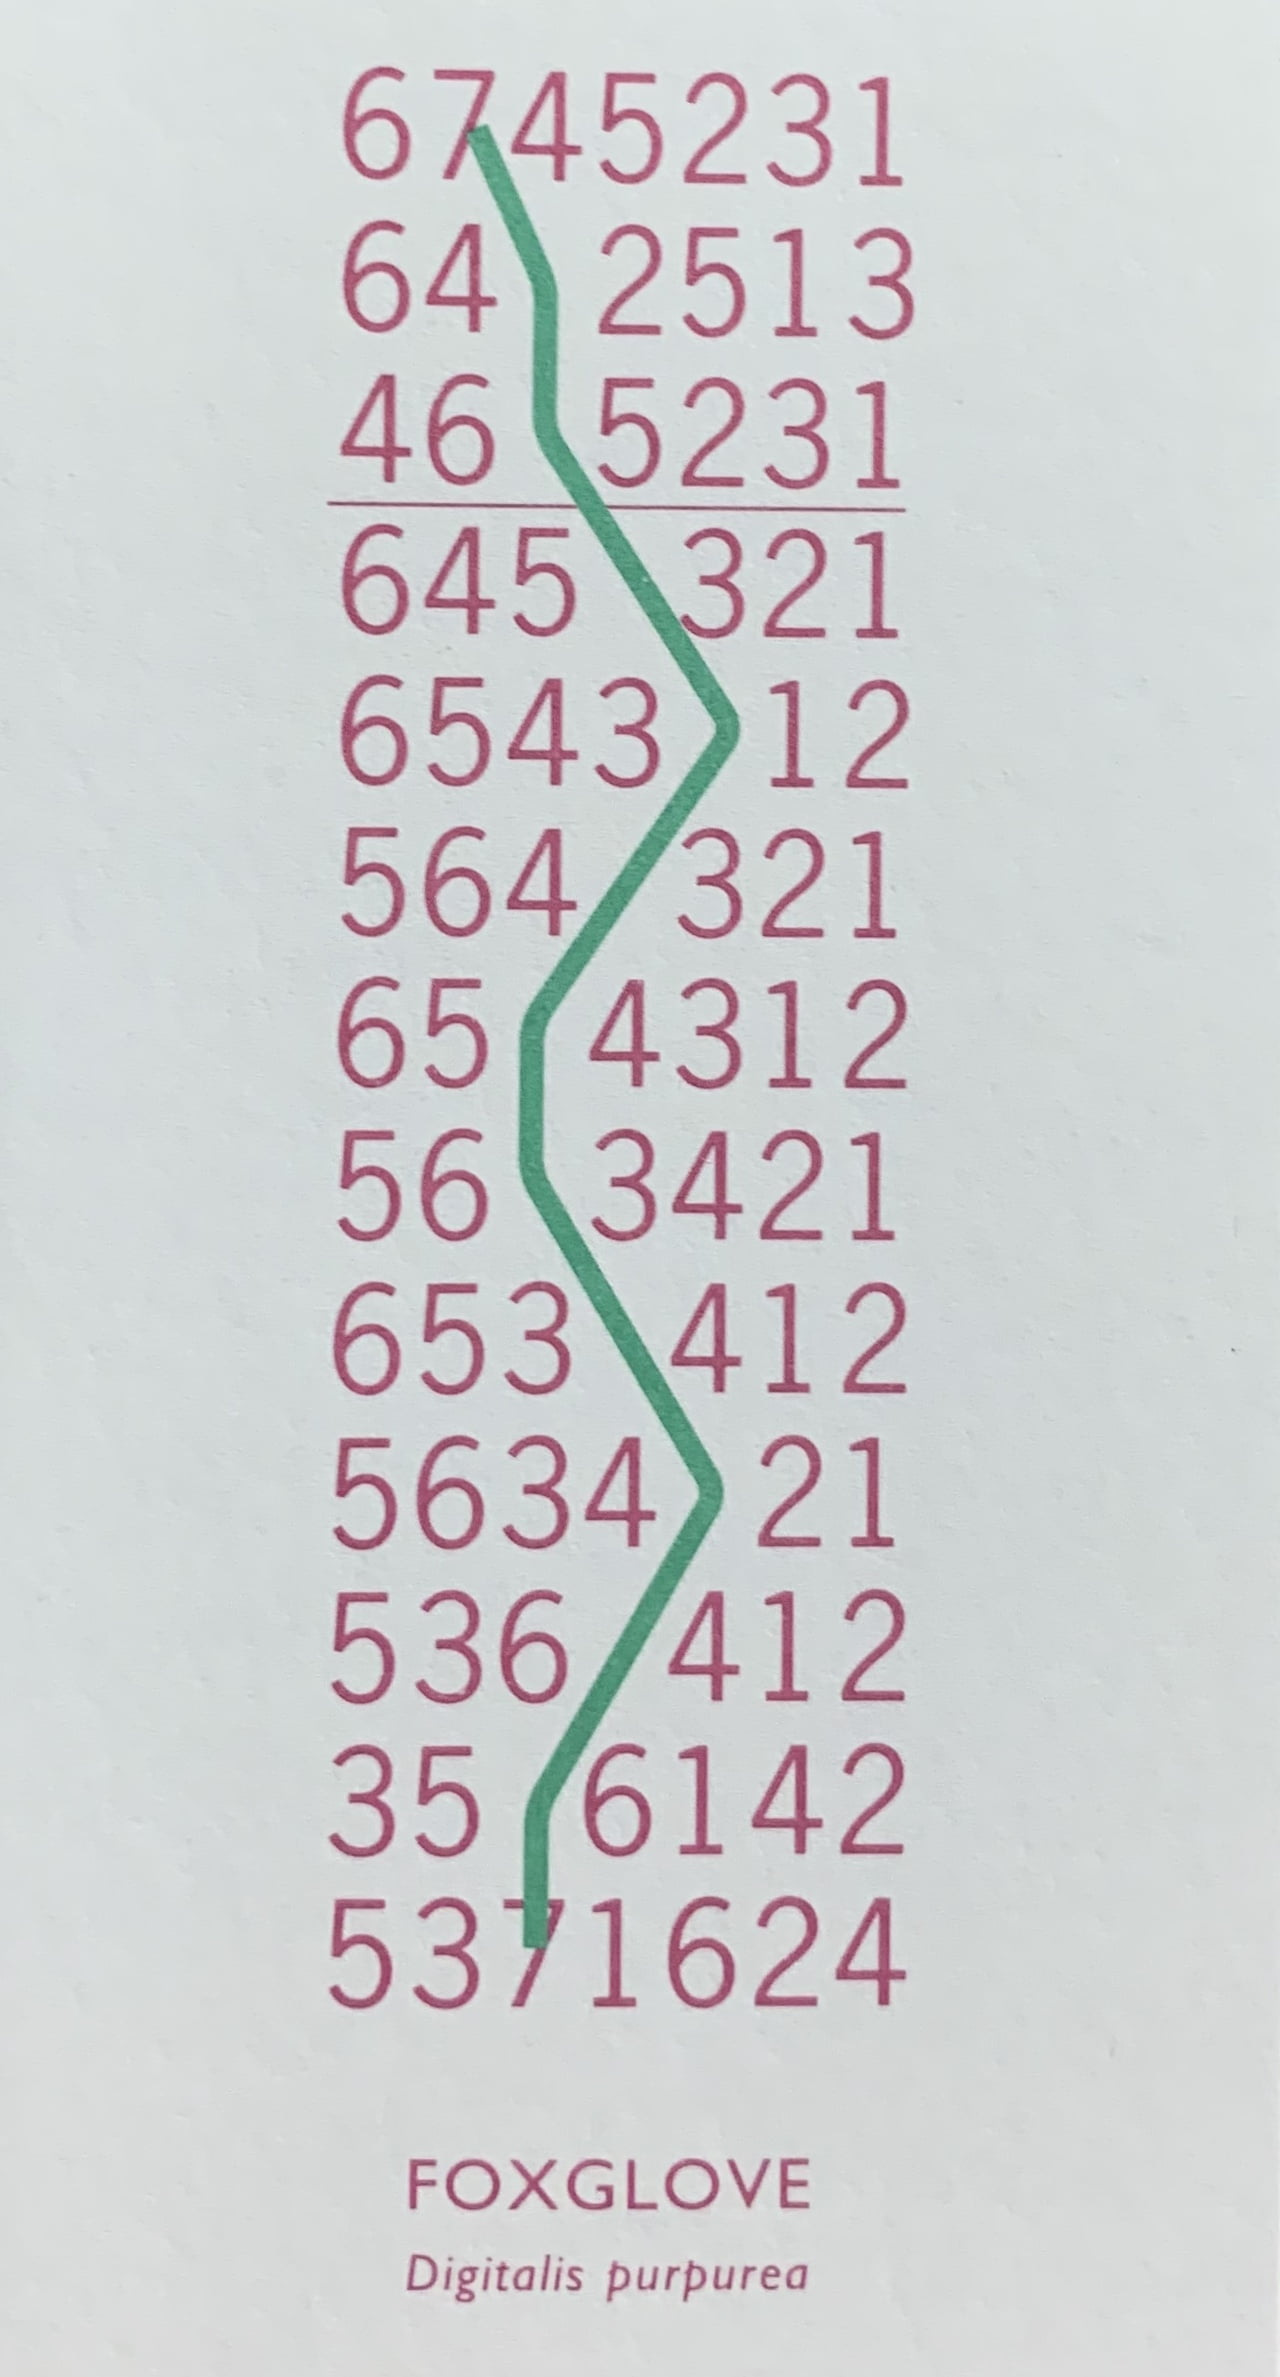 Ian Hamilton Finlay's "Foxglove": a column of lines comprising the numbers 1-6 in different combinations, with a crooked green line following the path of 7